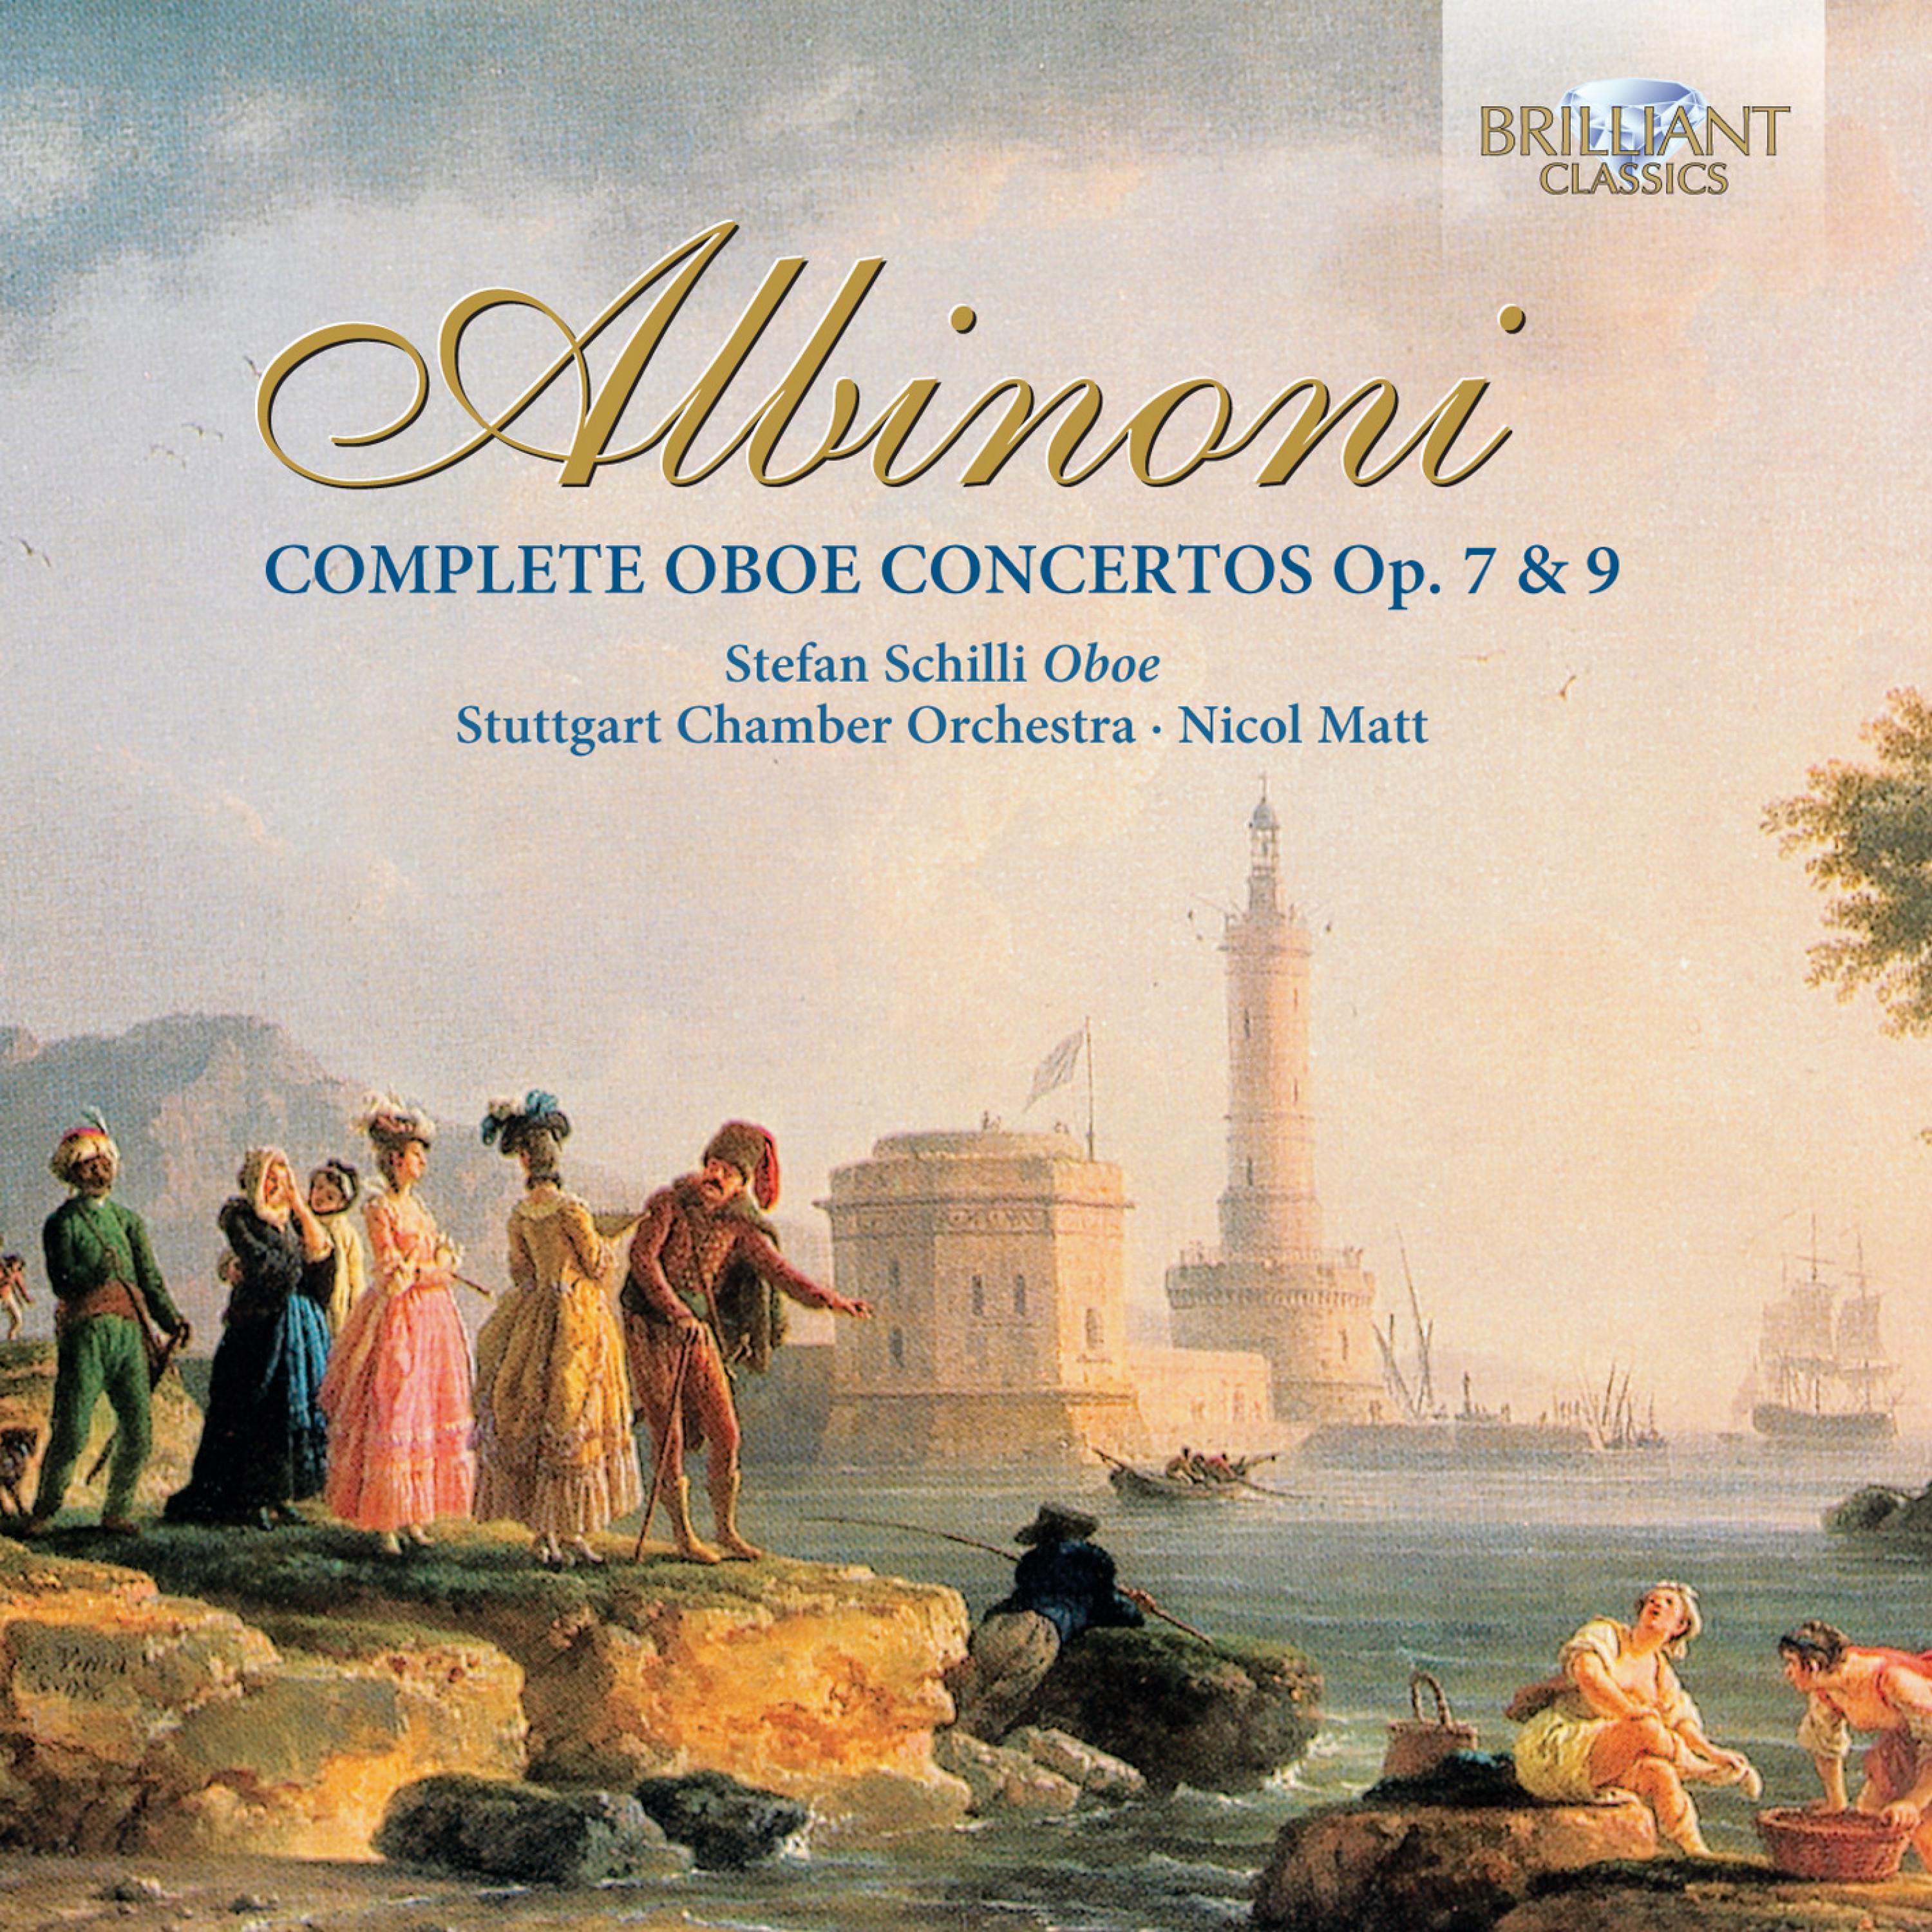 Stefan Schilli - Concerto à 5 in C Major for Two Oboes and Strings, Op. 9 No. 9: I. Allegro